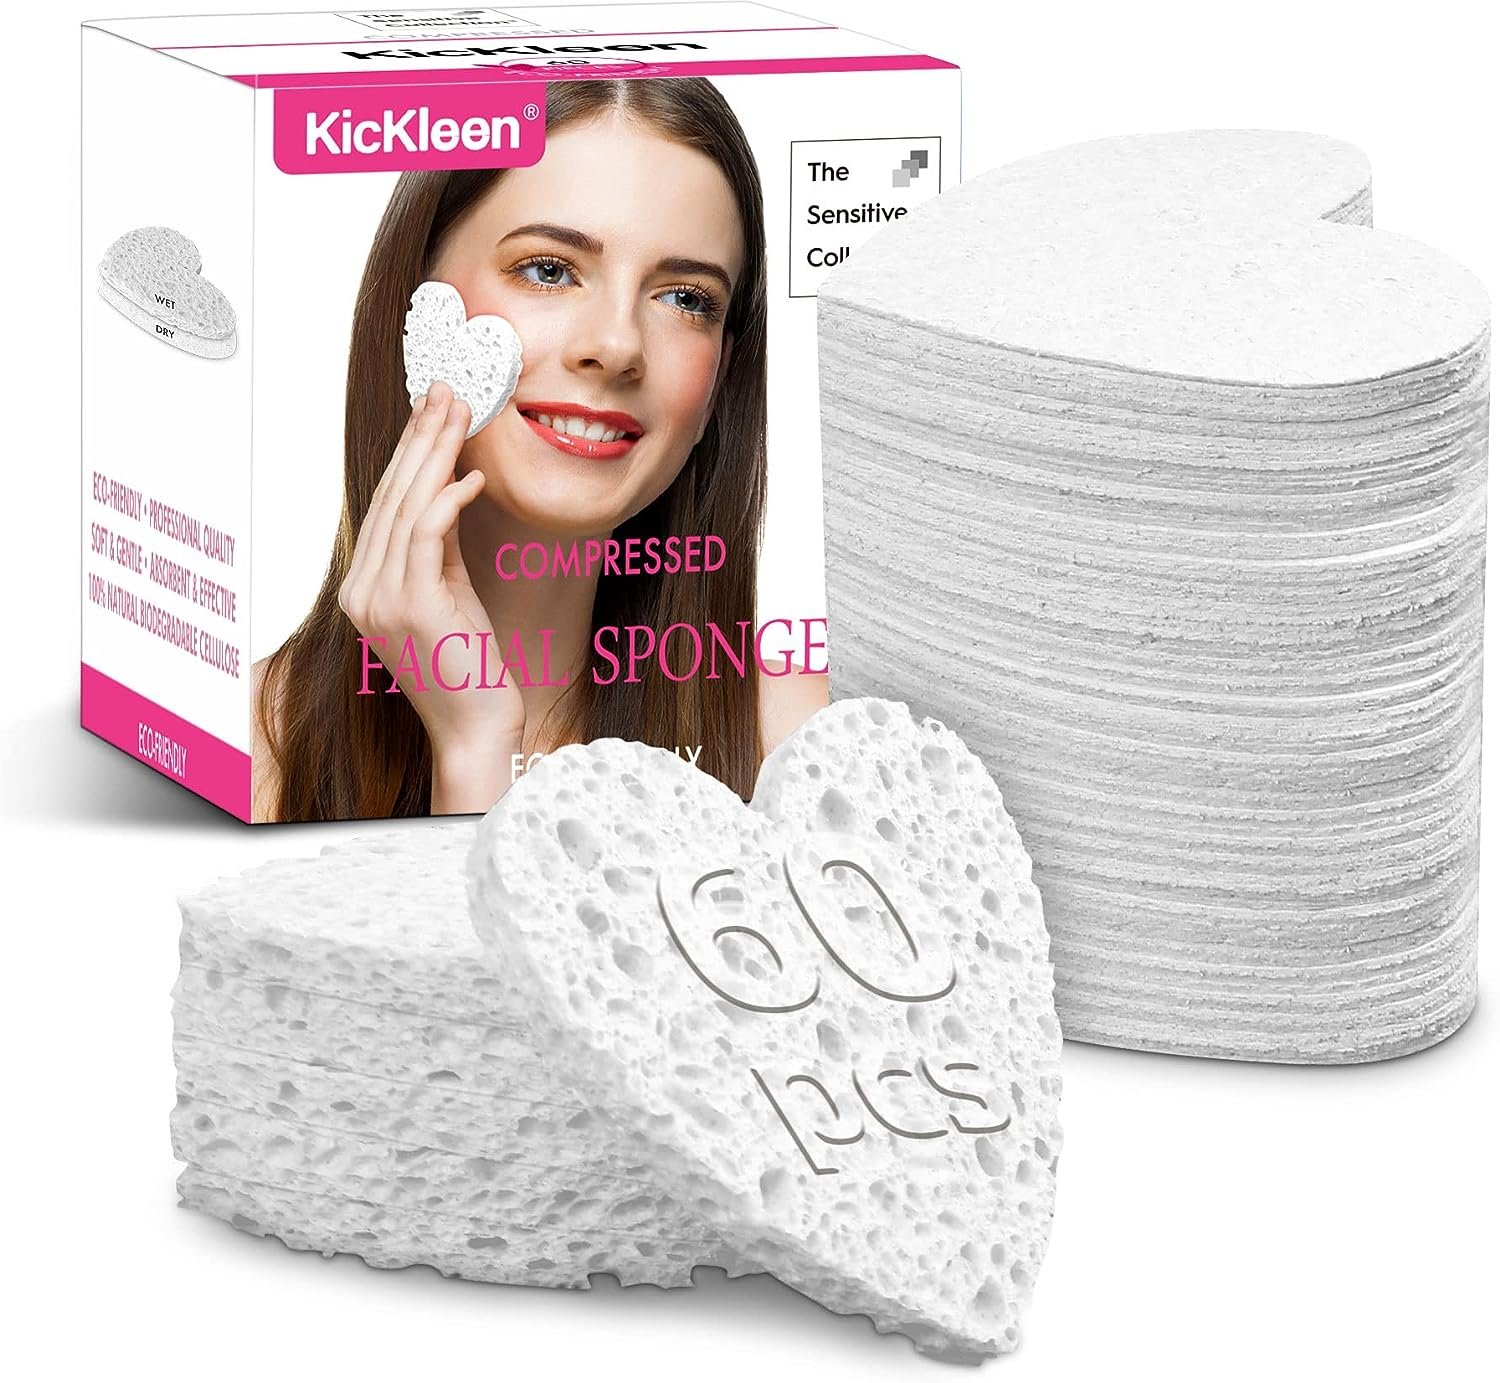 60-Count Kickleen Compressed Cellulose Heart Shape Facial Sponges | 100% Natural Cosmetic Spa Sponges for Facial Cleansing | Exfoliating 